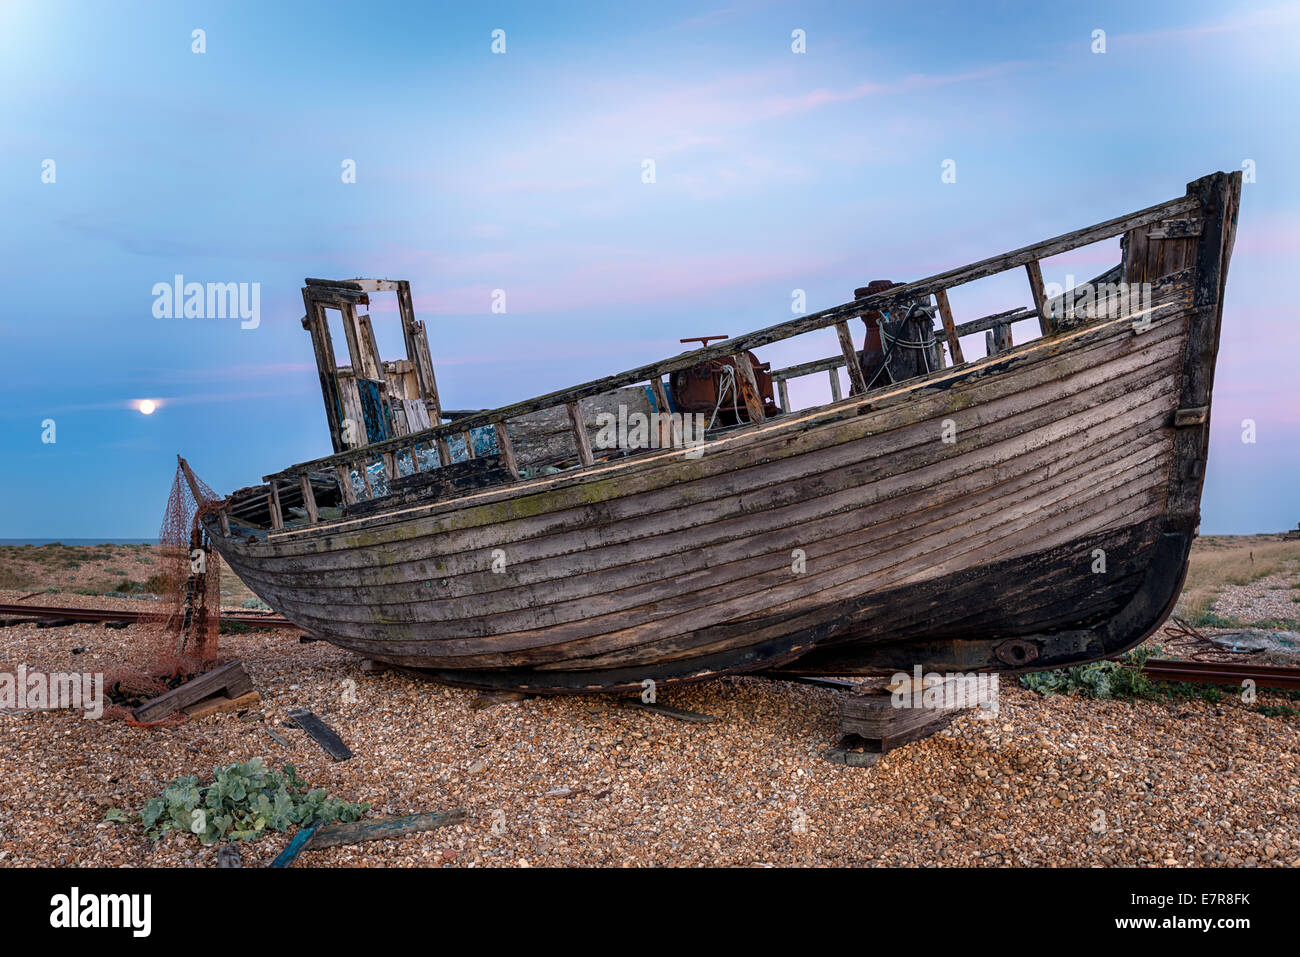 An old wrecked wooden fishing boat on a shingle beach under the light of a full moon Stock Photo